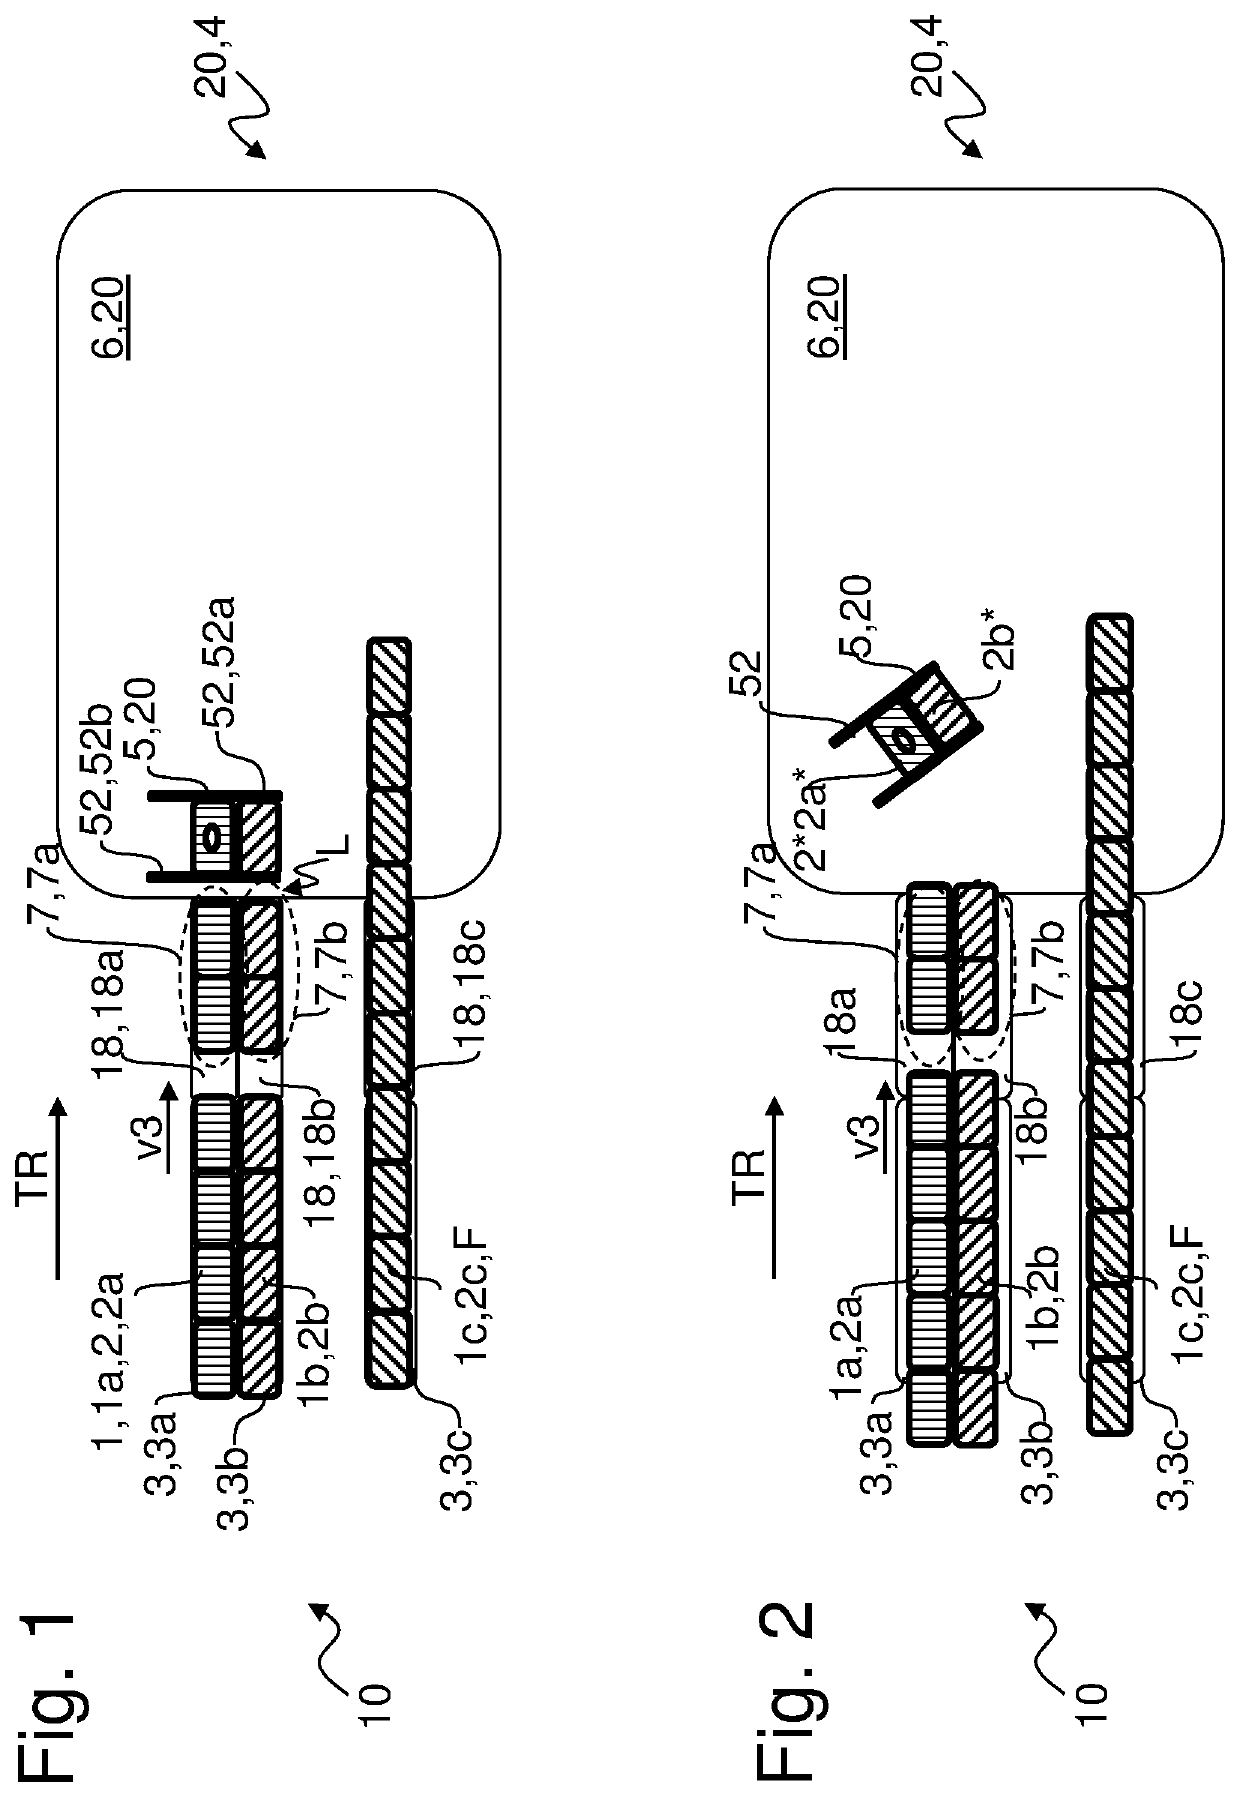 Method and apparatus for handling piece goods moved in at least two parallel rows